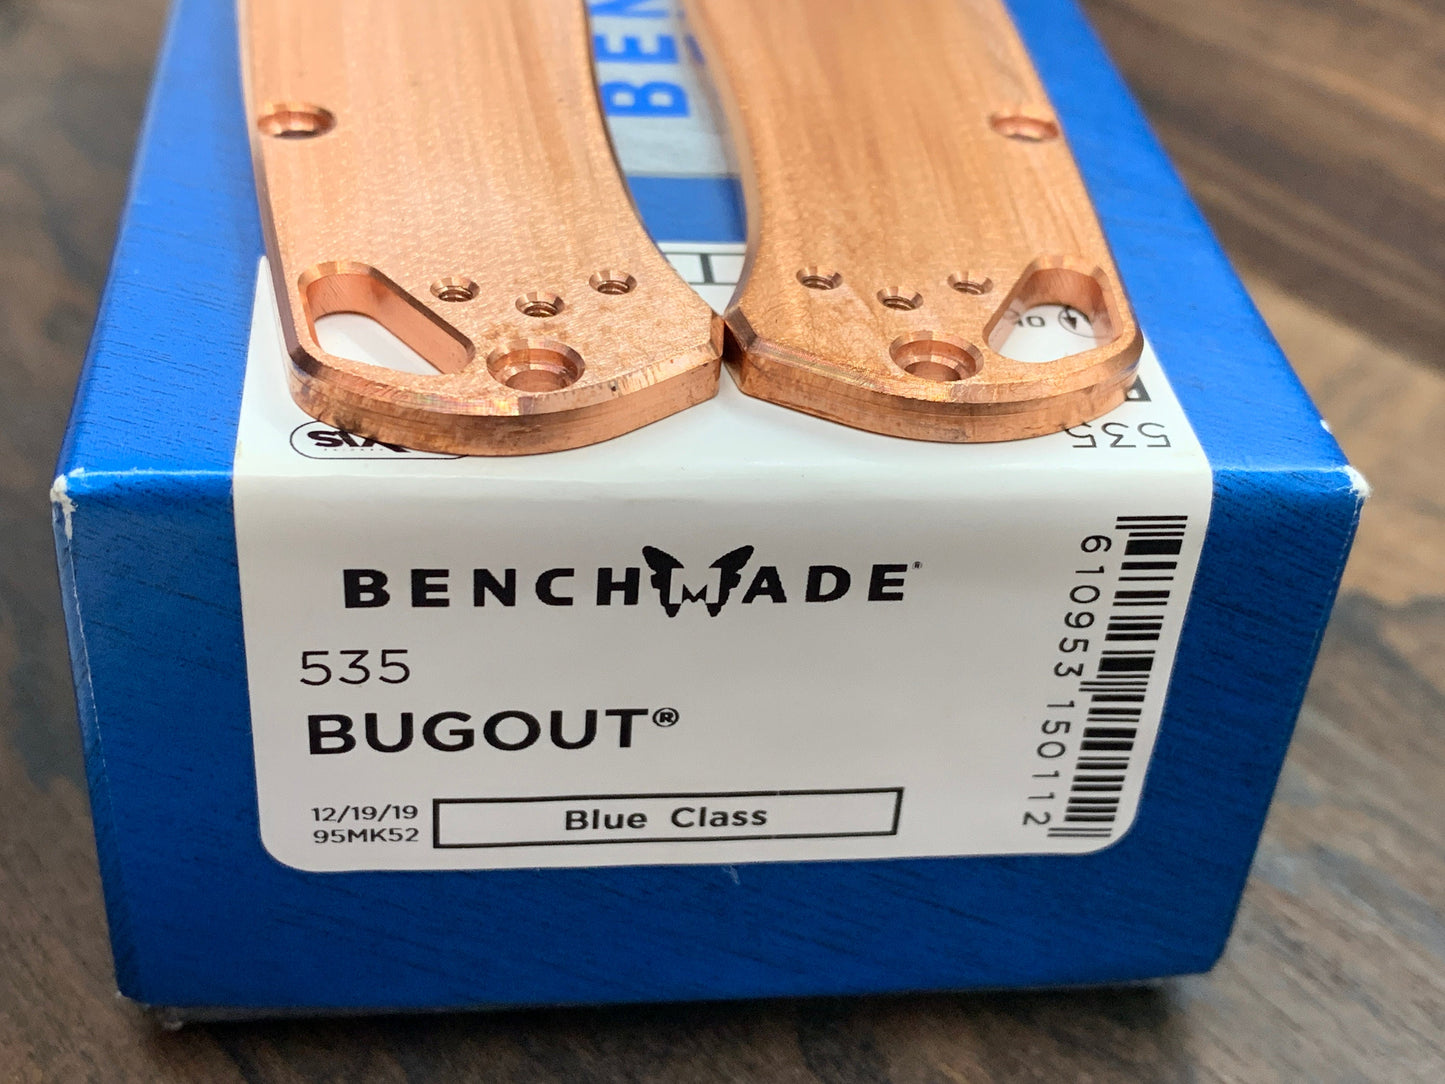 Proprietary Deep Brushed Copper Scales for Benchmade Bugout 535